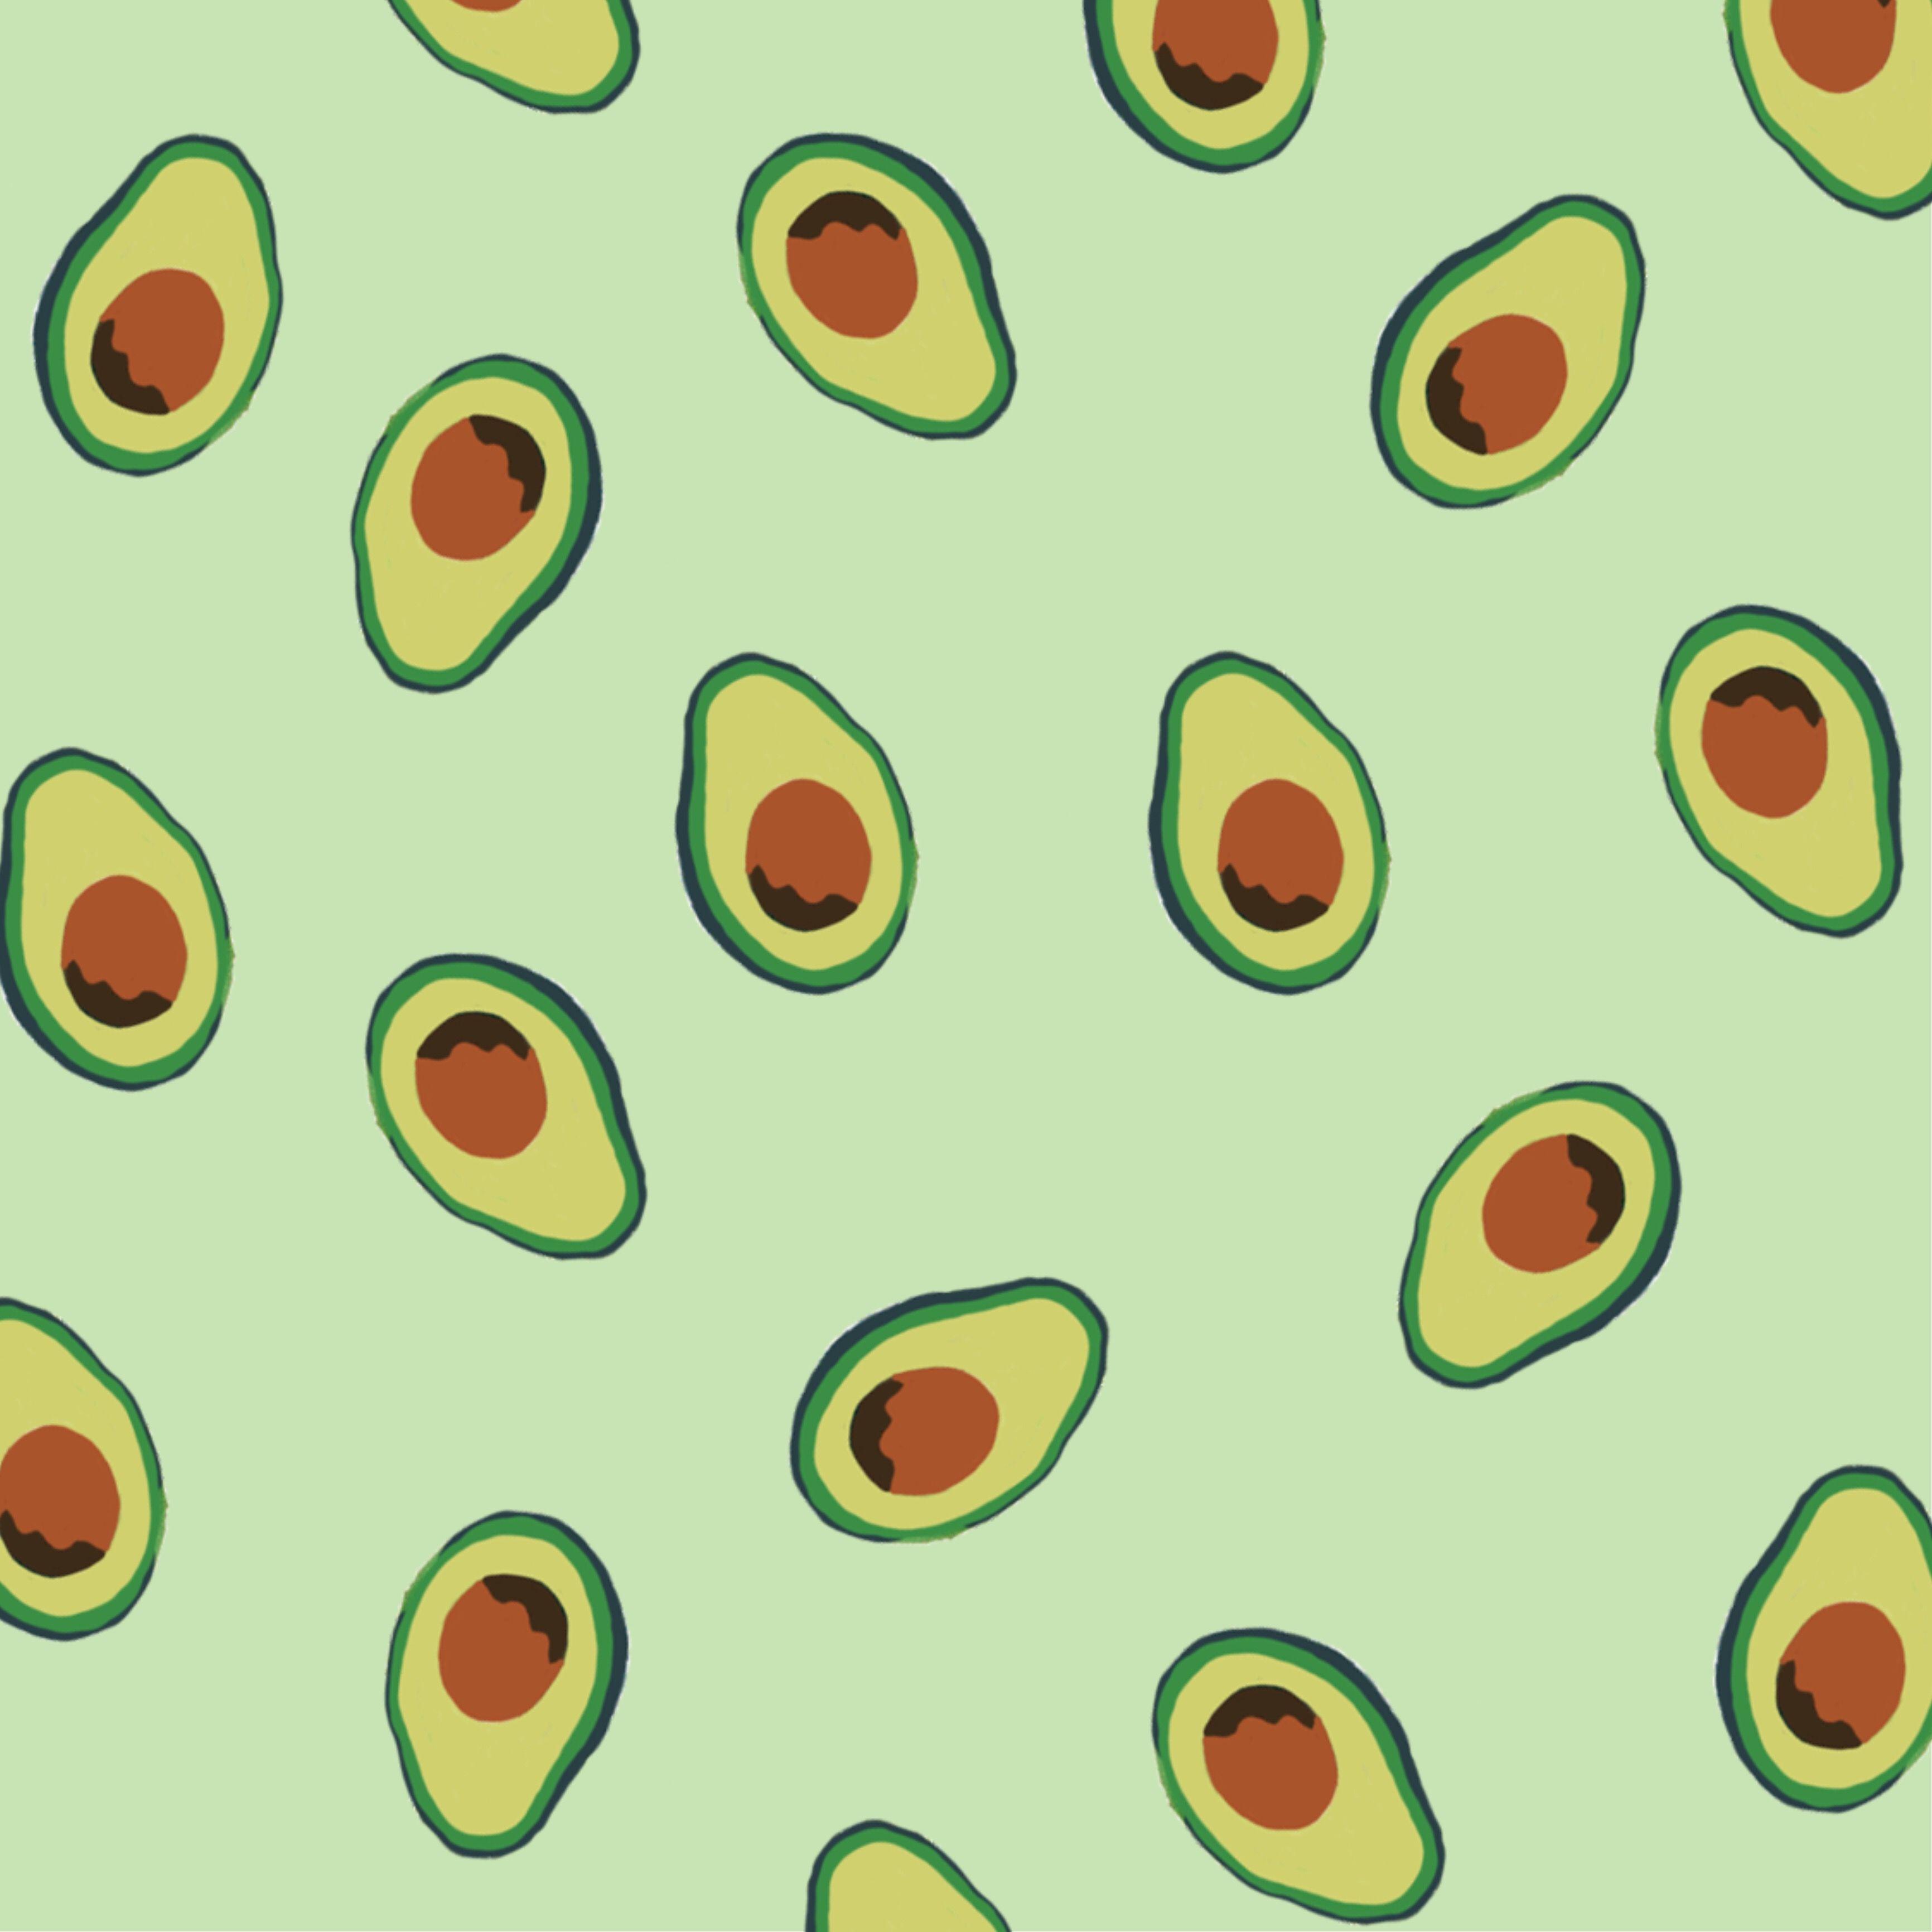 Premium Vector  Cute avocado seamless patetrn cartoon funny background or  print kawaii design for bedding wrapping paper wallpaper fruit  illustration